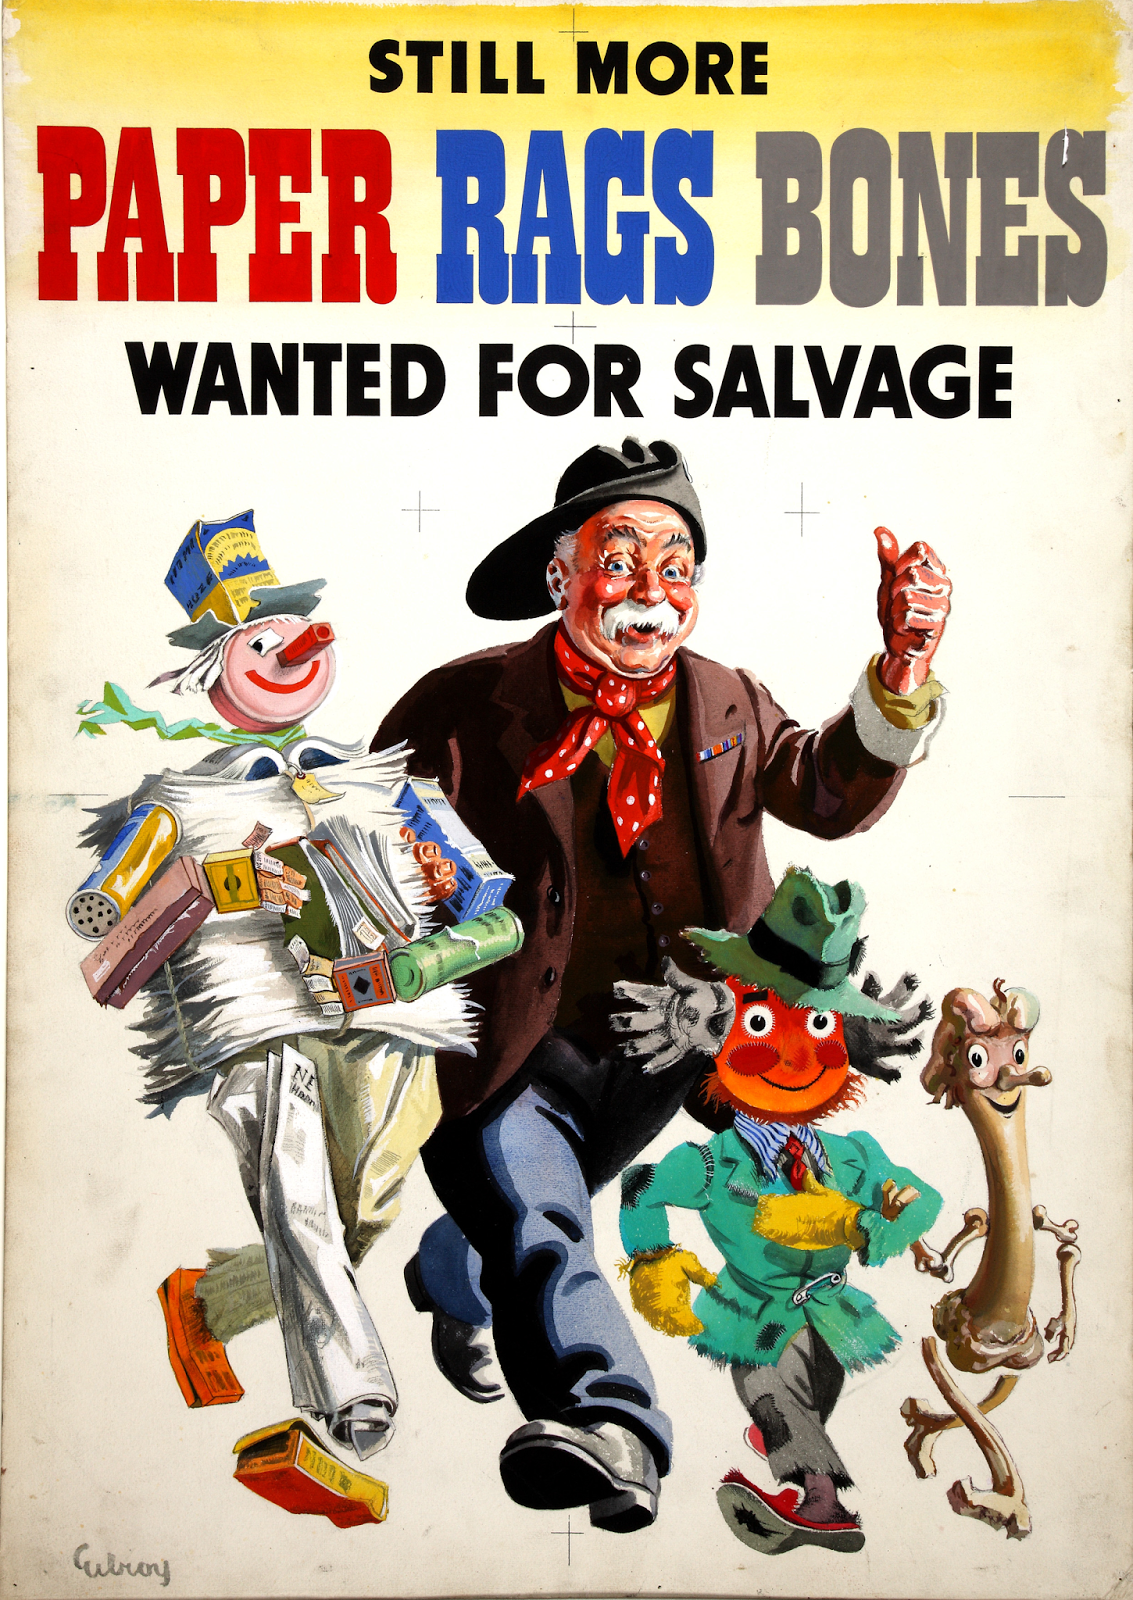 British poster from World War II, reproduced in the Wikipedia article on Recycling: http://en.wikipedia.org/wiki/Recycling